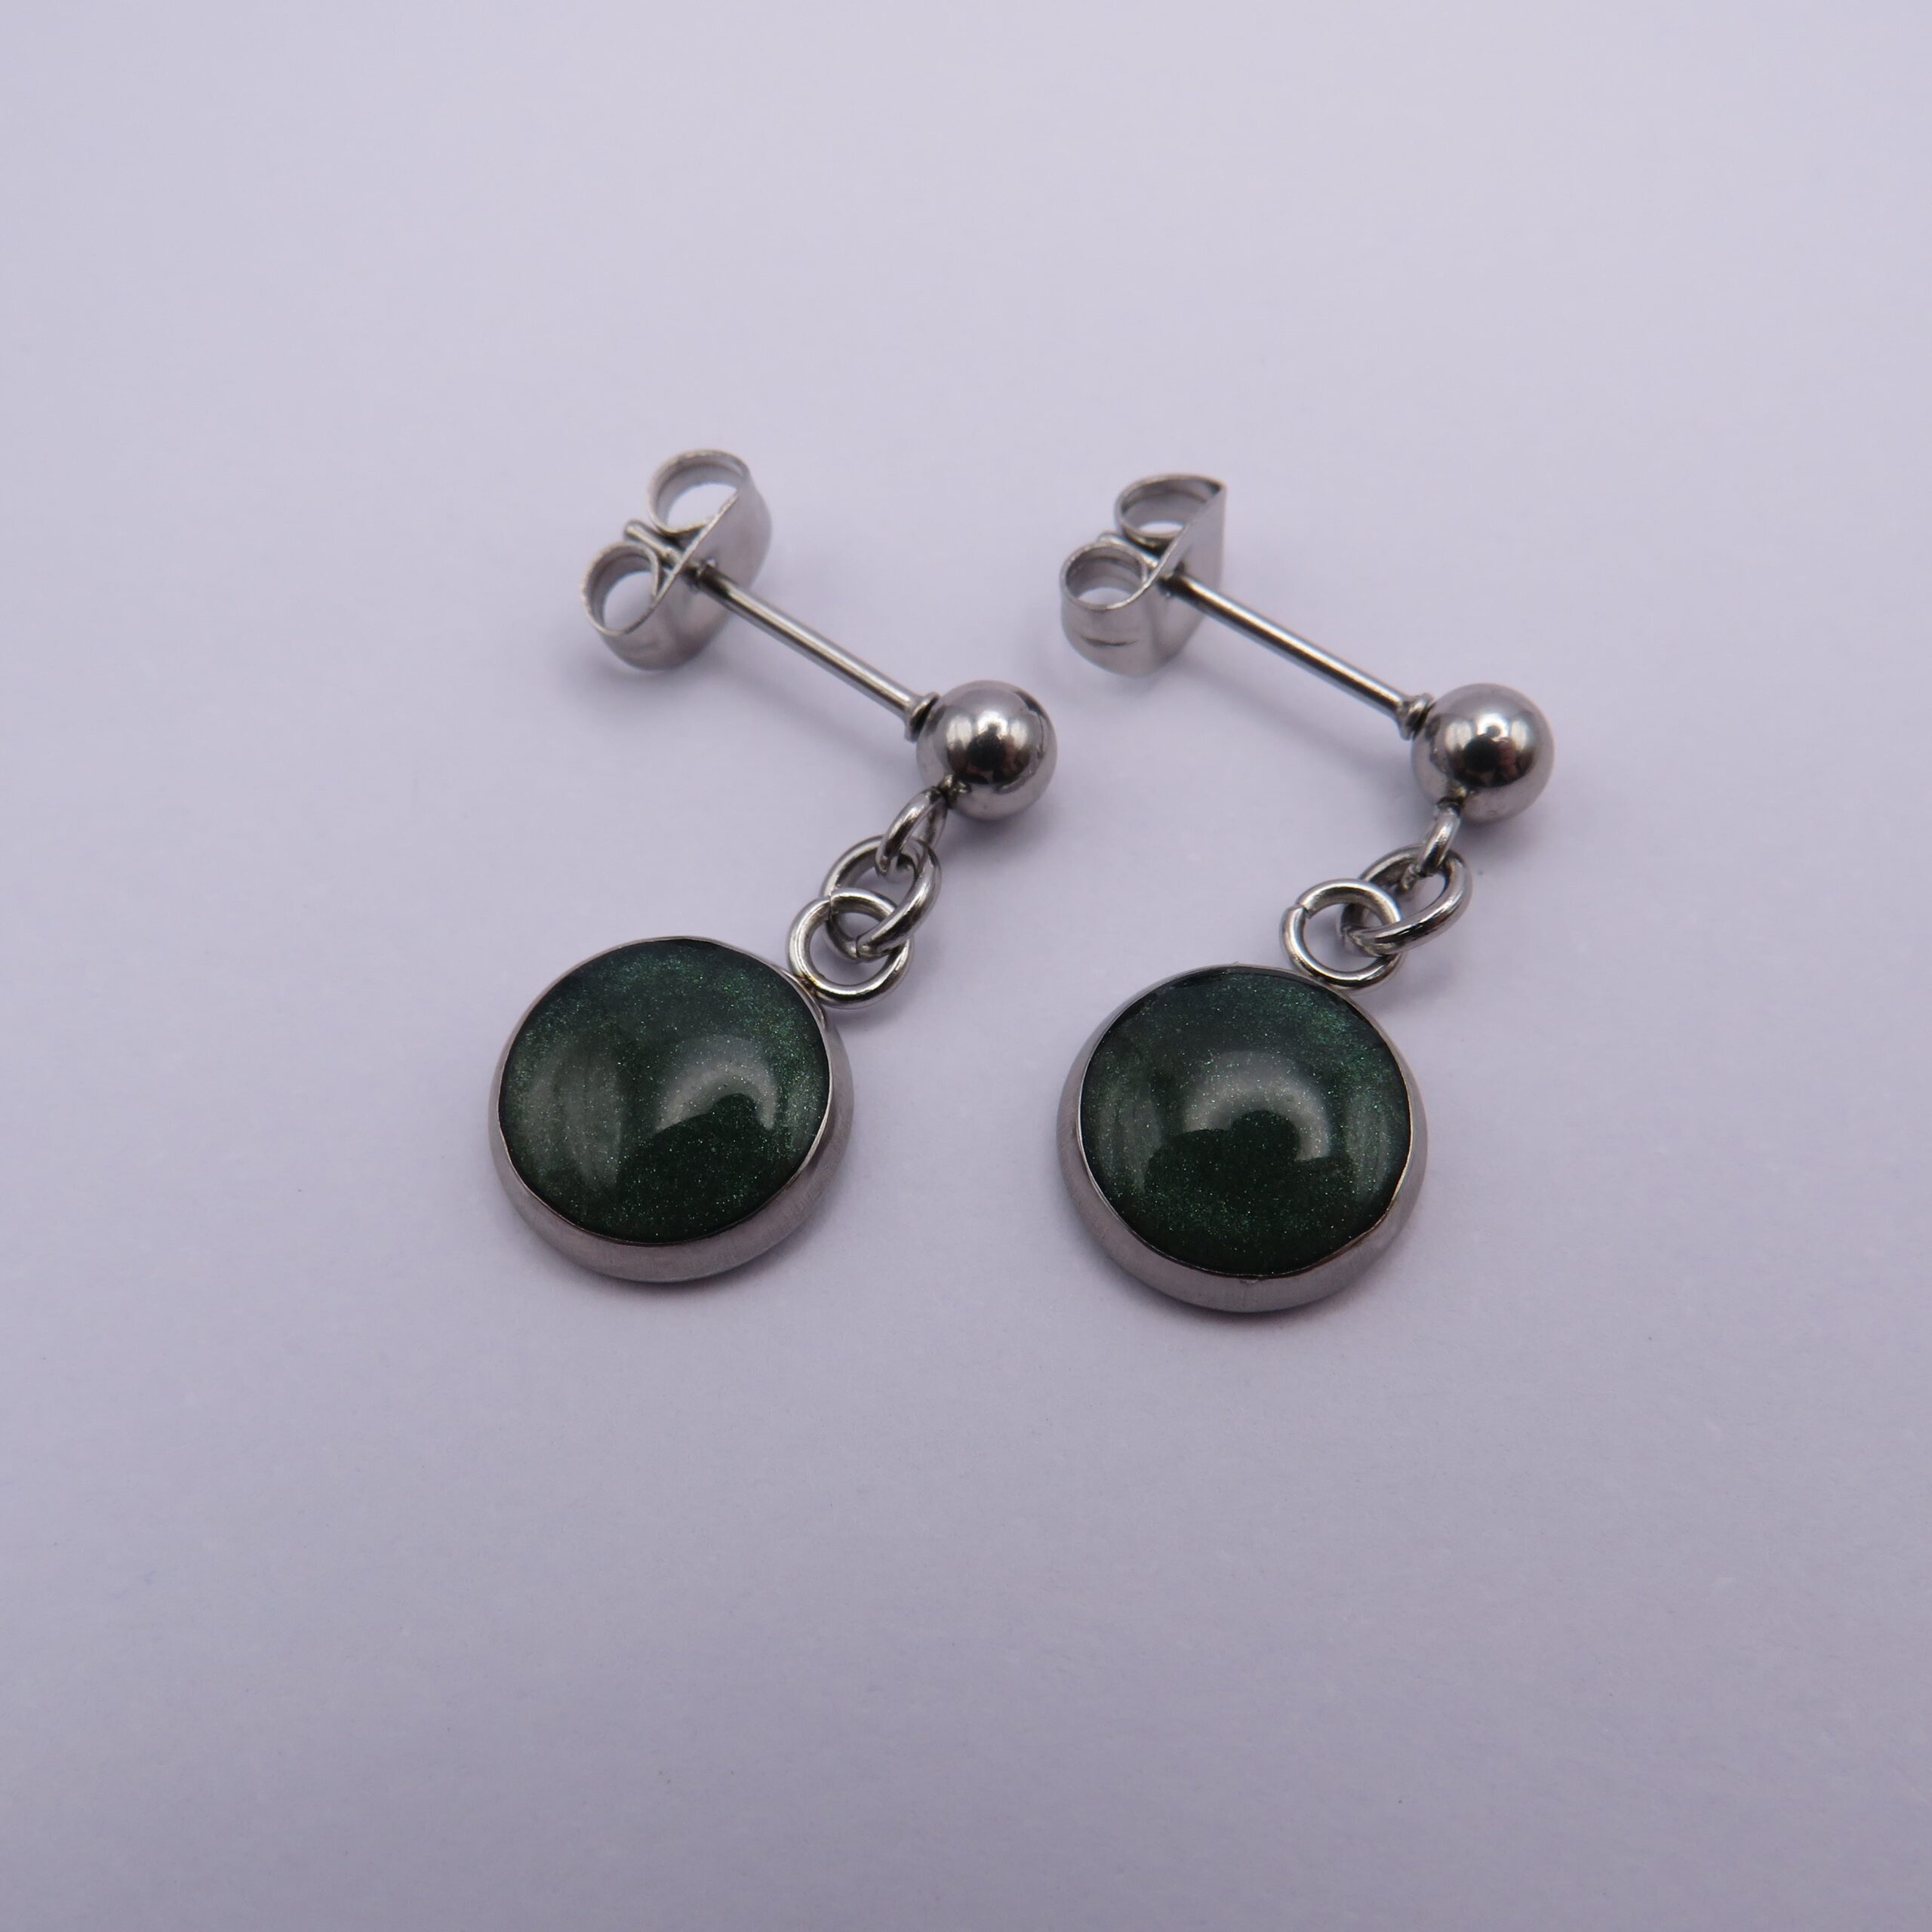 Stainless Steel Green Cabochon Ball Drop Earrings